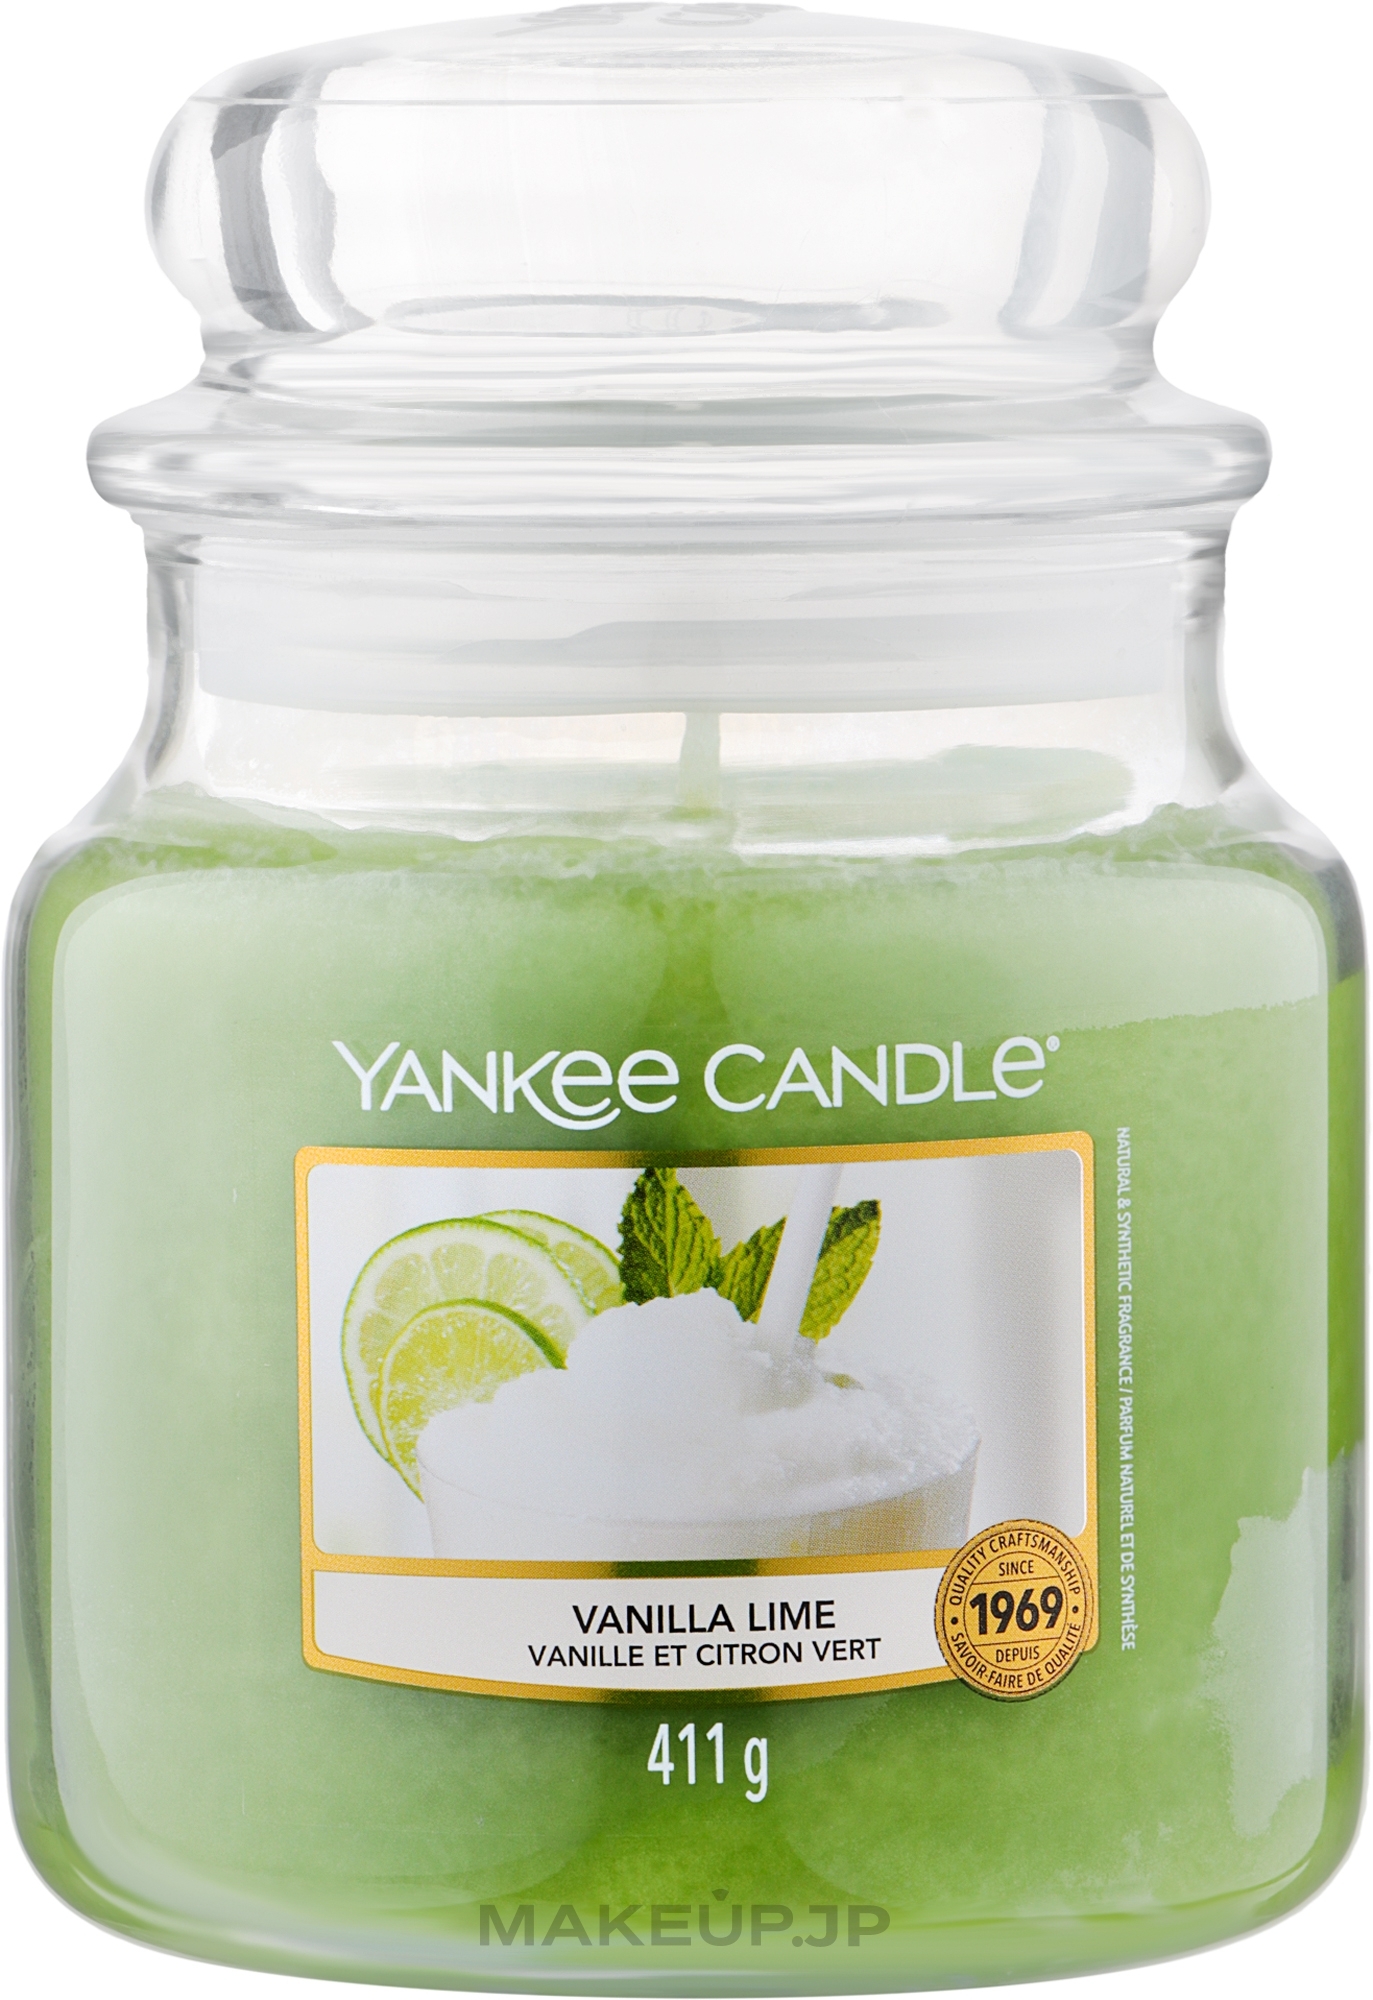 Scented Candle "Vanilla and Lime" - Yankee Candle Vanilla Lime — photo 411 g